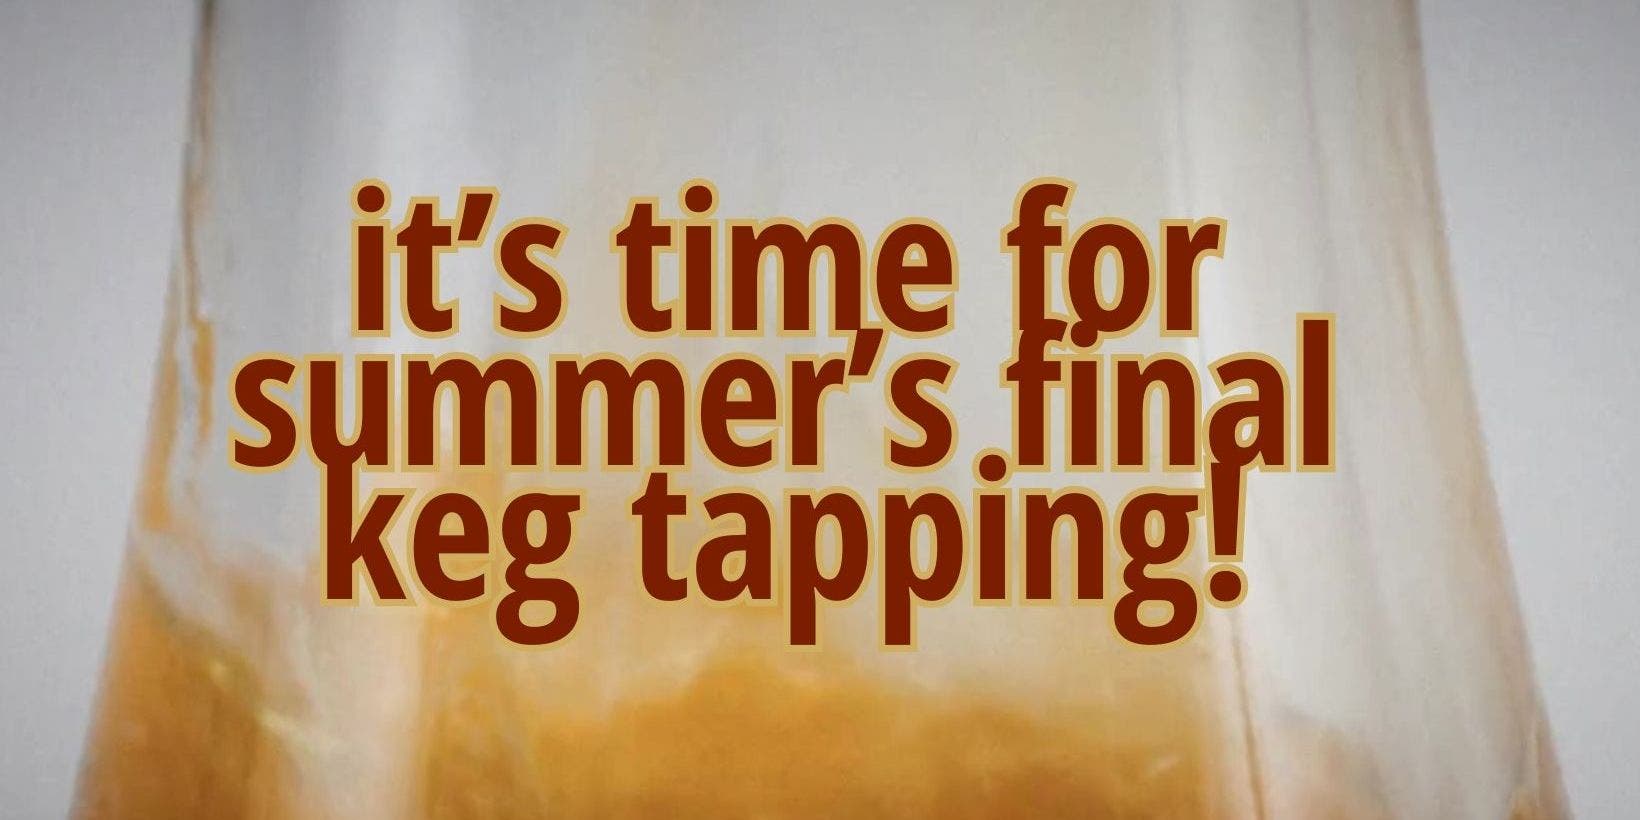 Our August Keg Tapping Celebration!